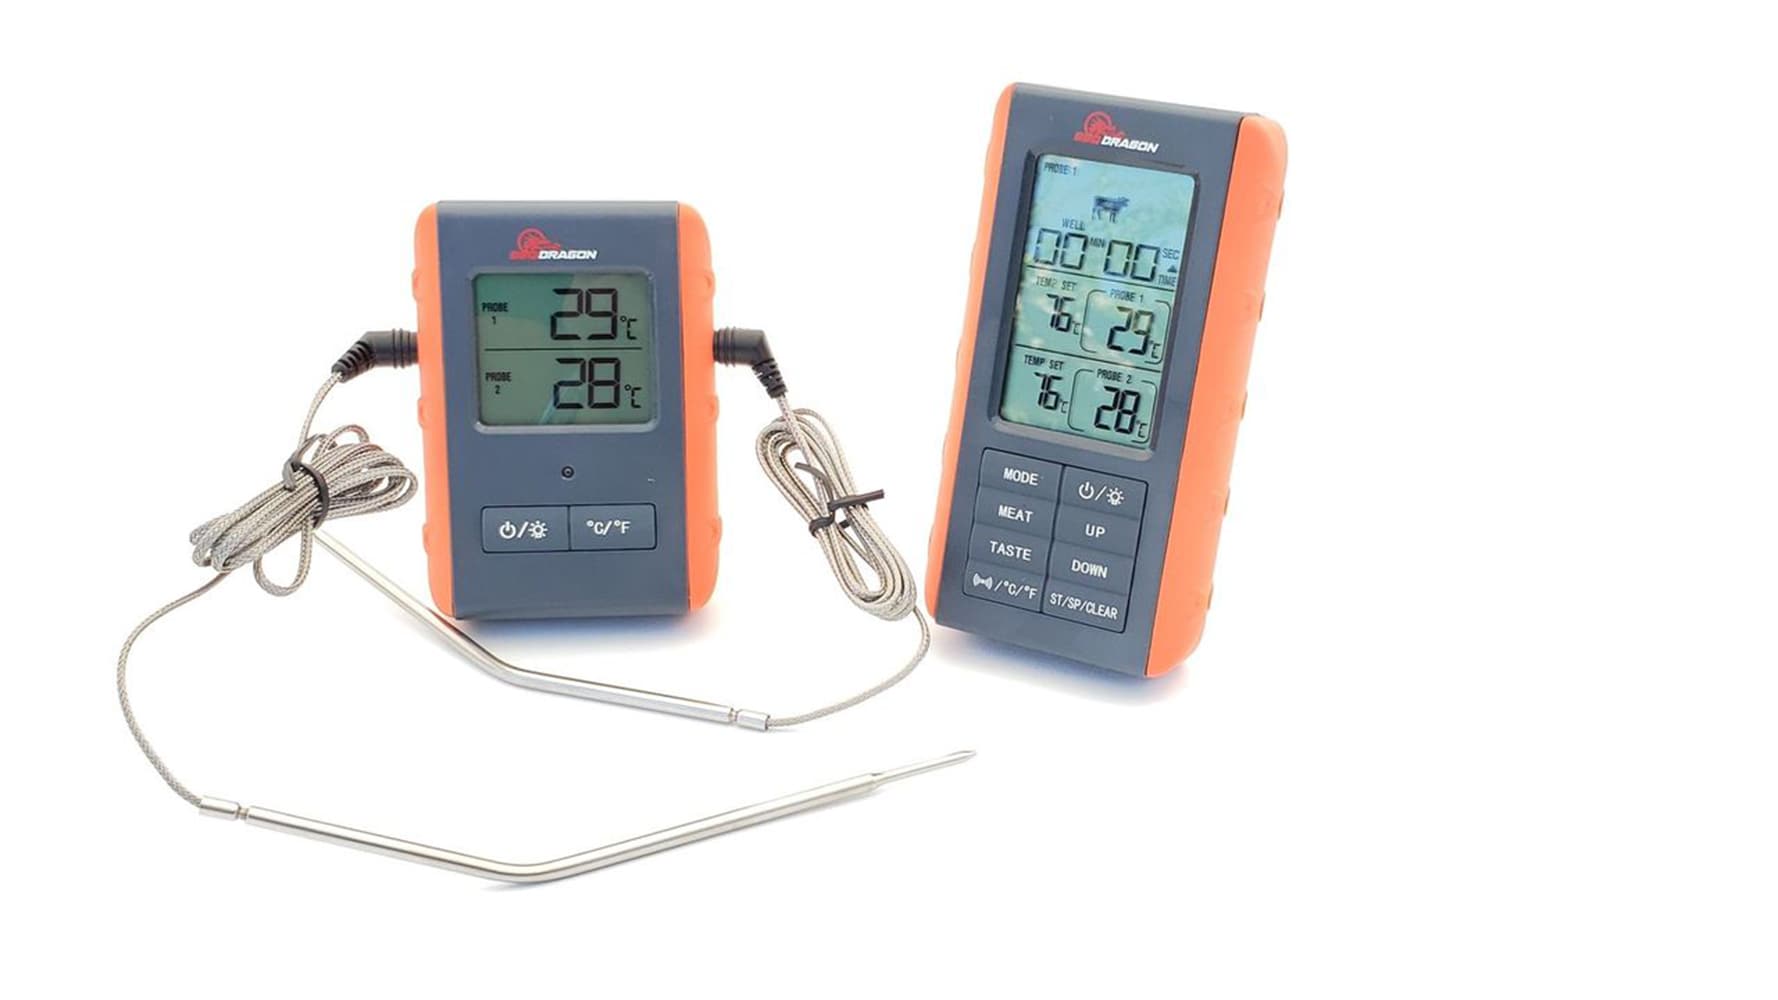 Wireless Digital Meat Thermometer